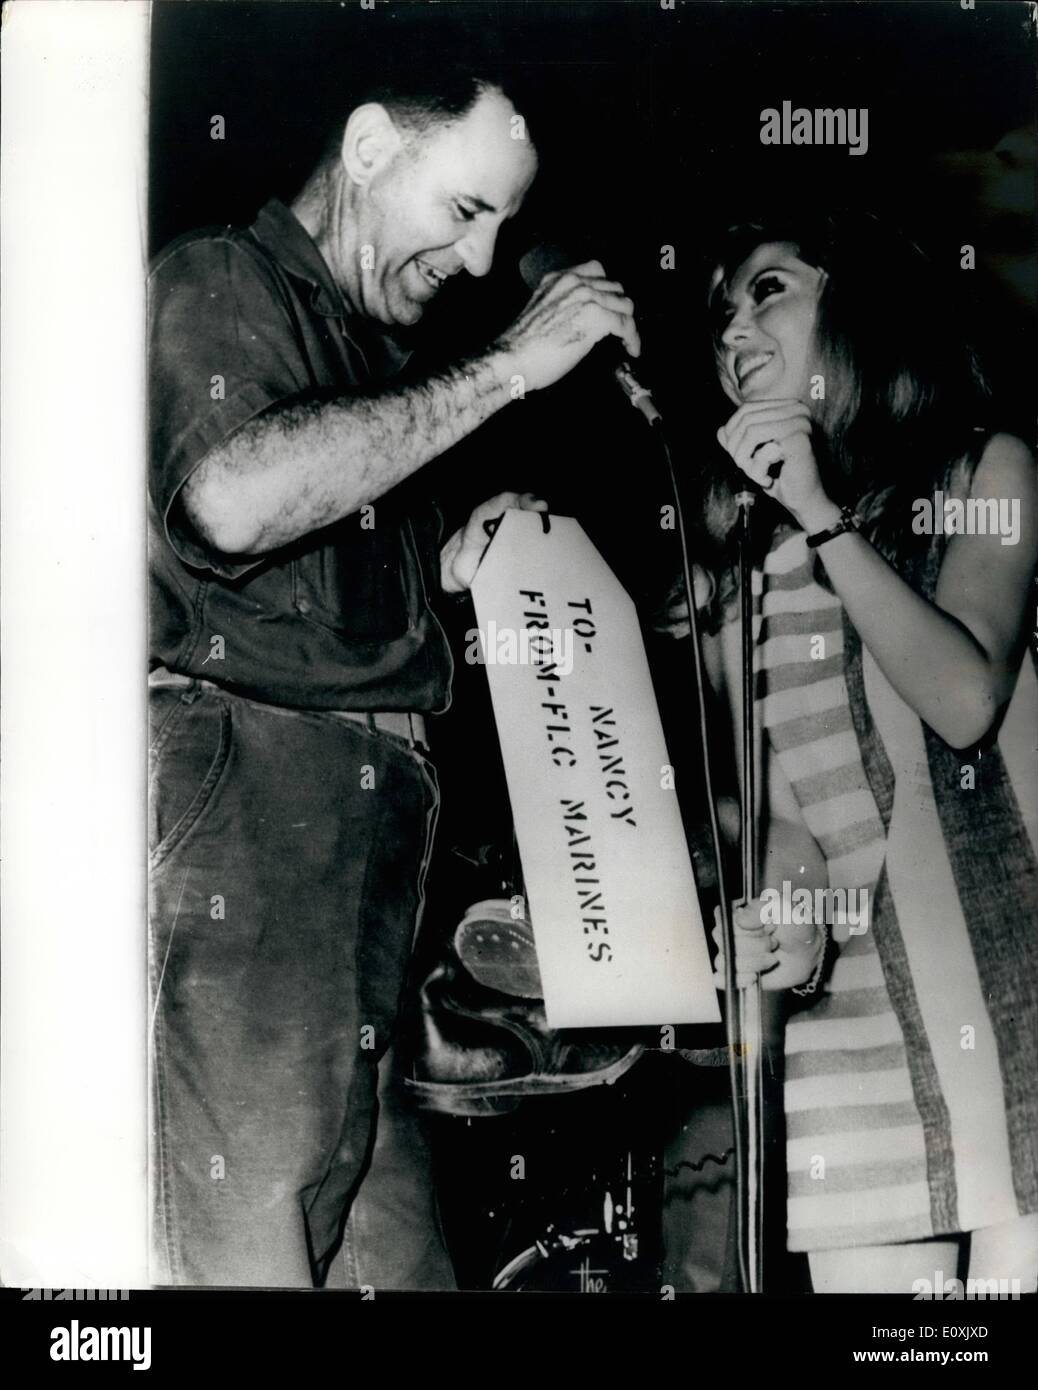 Mar. 02, 1967 - 2.3.67 Nancy Sinatra gets a gift of U.S. Army boots in Vietnam. Photo Shows: Nancy Sinatra is seen being presented with a pair of U.S. Army boots by Brig. General E. Herbold Jr. after singing her hit song These Boots Were Made For Walking to U.S. Troops near Da Nang during her tour to entertain the soldiers in Vietnam. Stock Photo